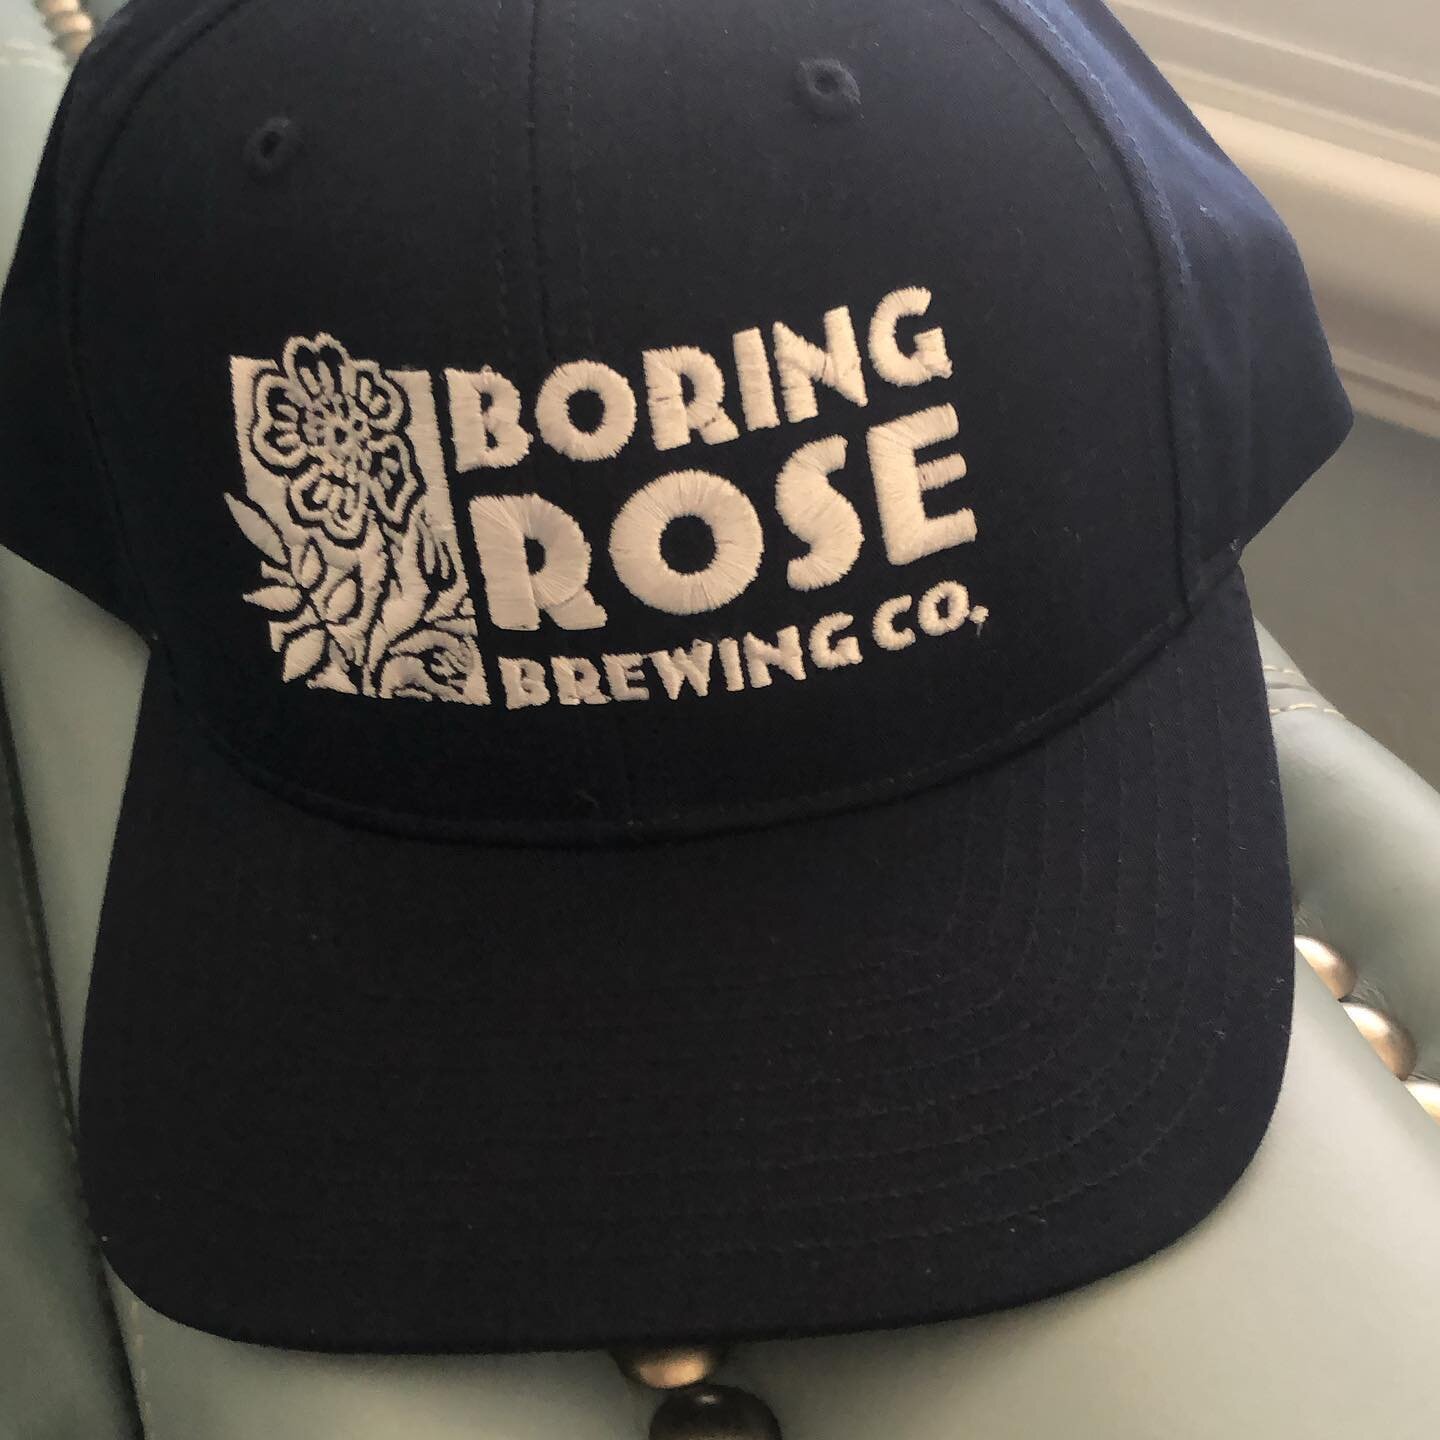 @boring_rose_brewing is a great brewery I discovered at @sacgrilledcheese today. I need your help to get them over the 1k mark on Instagram. Please head over and like! ^Ben #sacramento